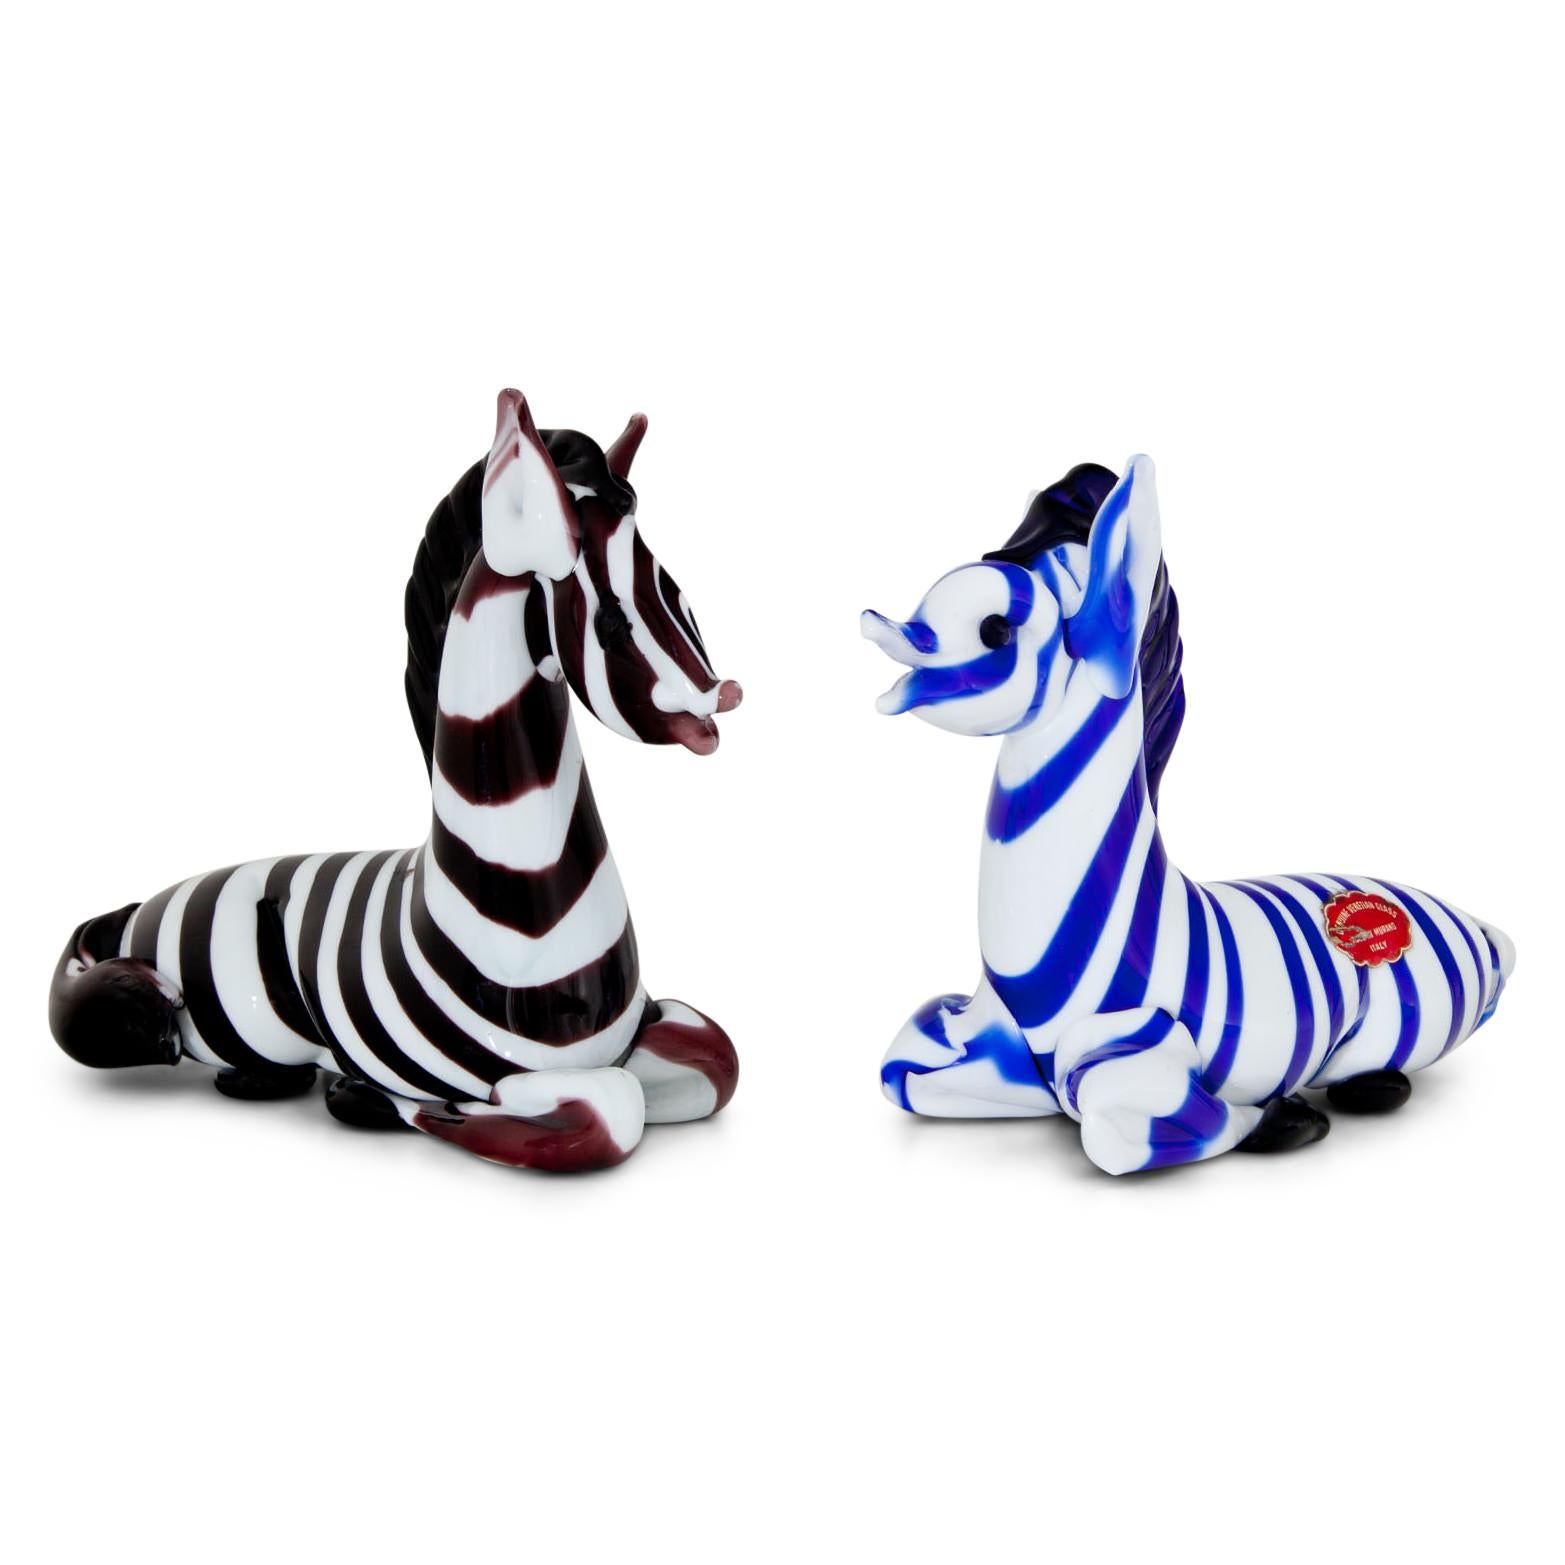 Two zebras out of Murano glass, one is red and white striped, the other one blue and white. Both are labeled “Genuine Venetian Glass, Made in Murano, Italy”.